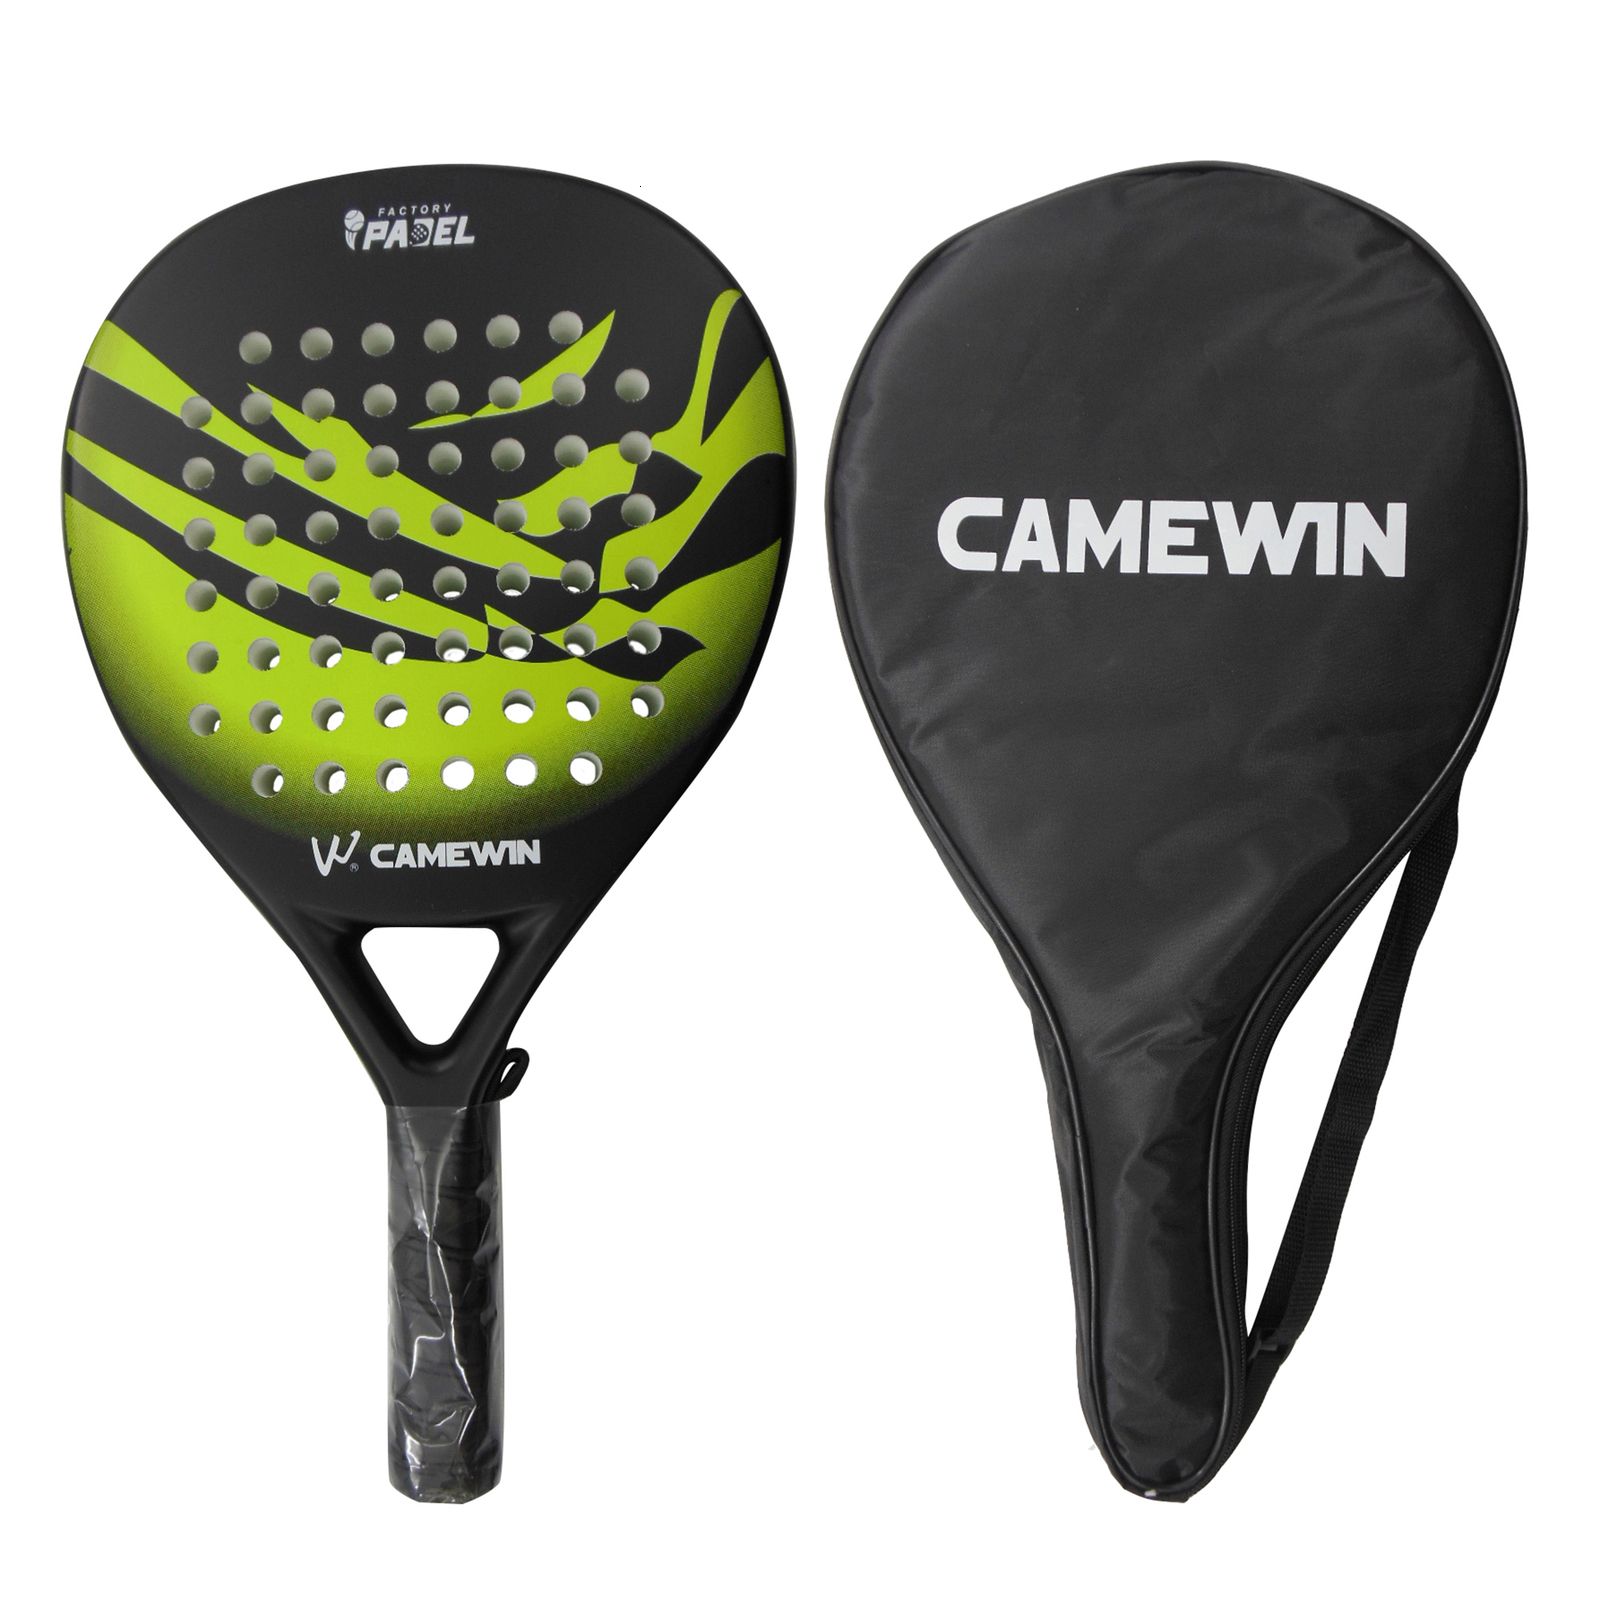 Tennis Rackets CAMEWIN4013 Padel Beach Tennis Racket Professional Tennis Carbon Fiber Soft EVA Face Tennis Paddle Racquet Racket With Bag Cover 230630 From Bao05, $36.53 DHgate